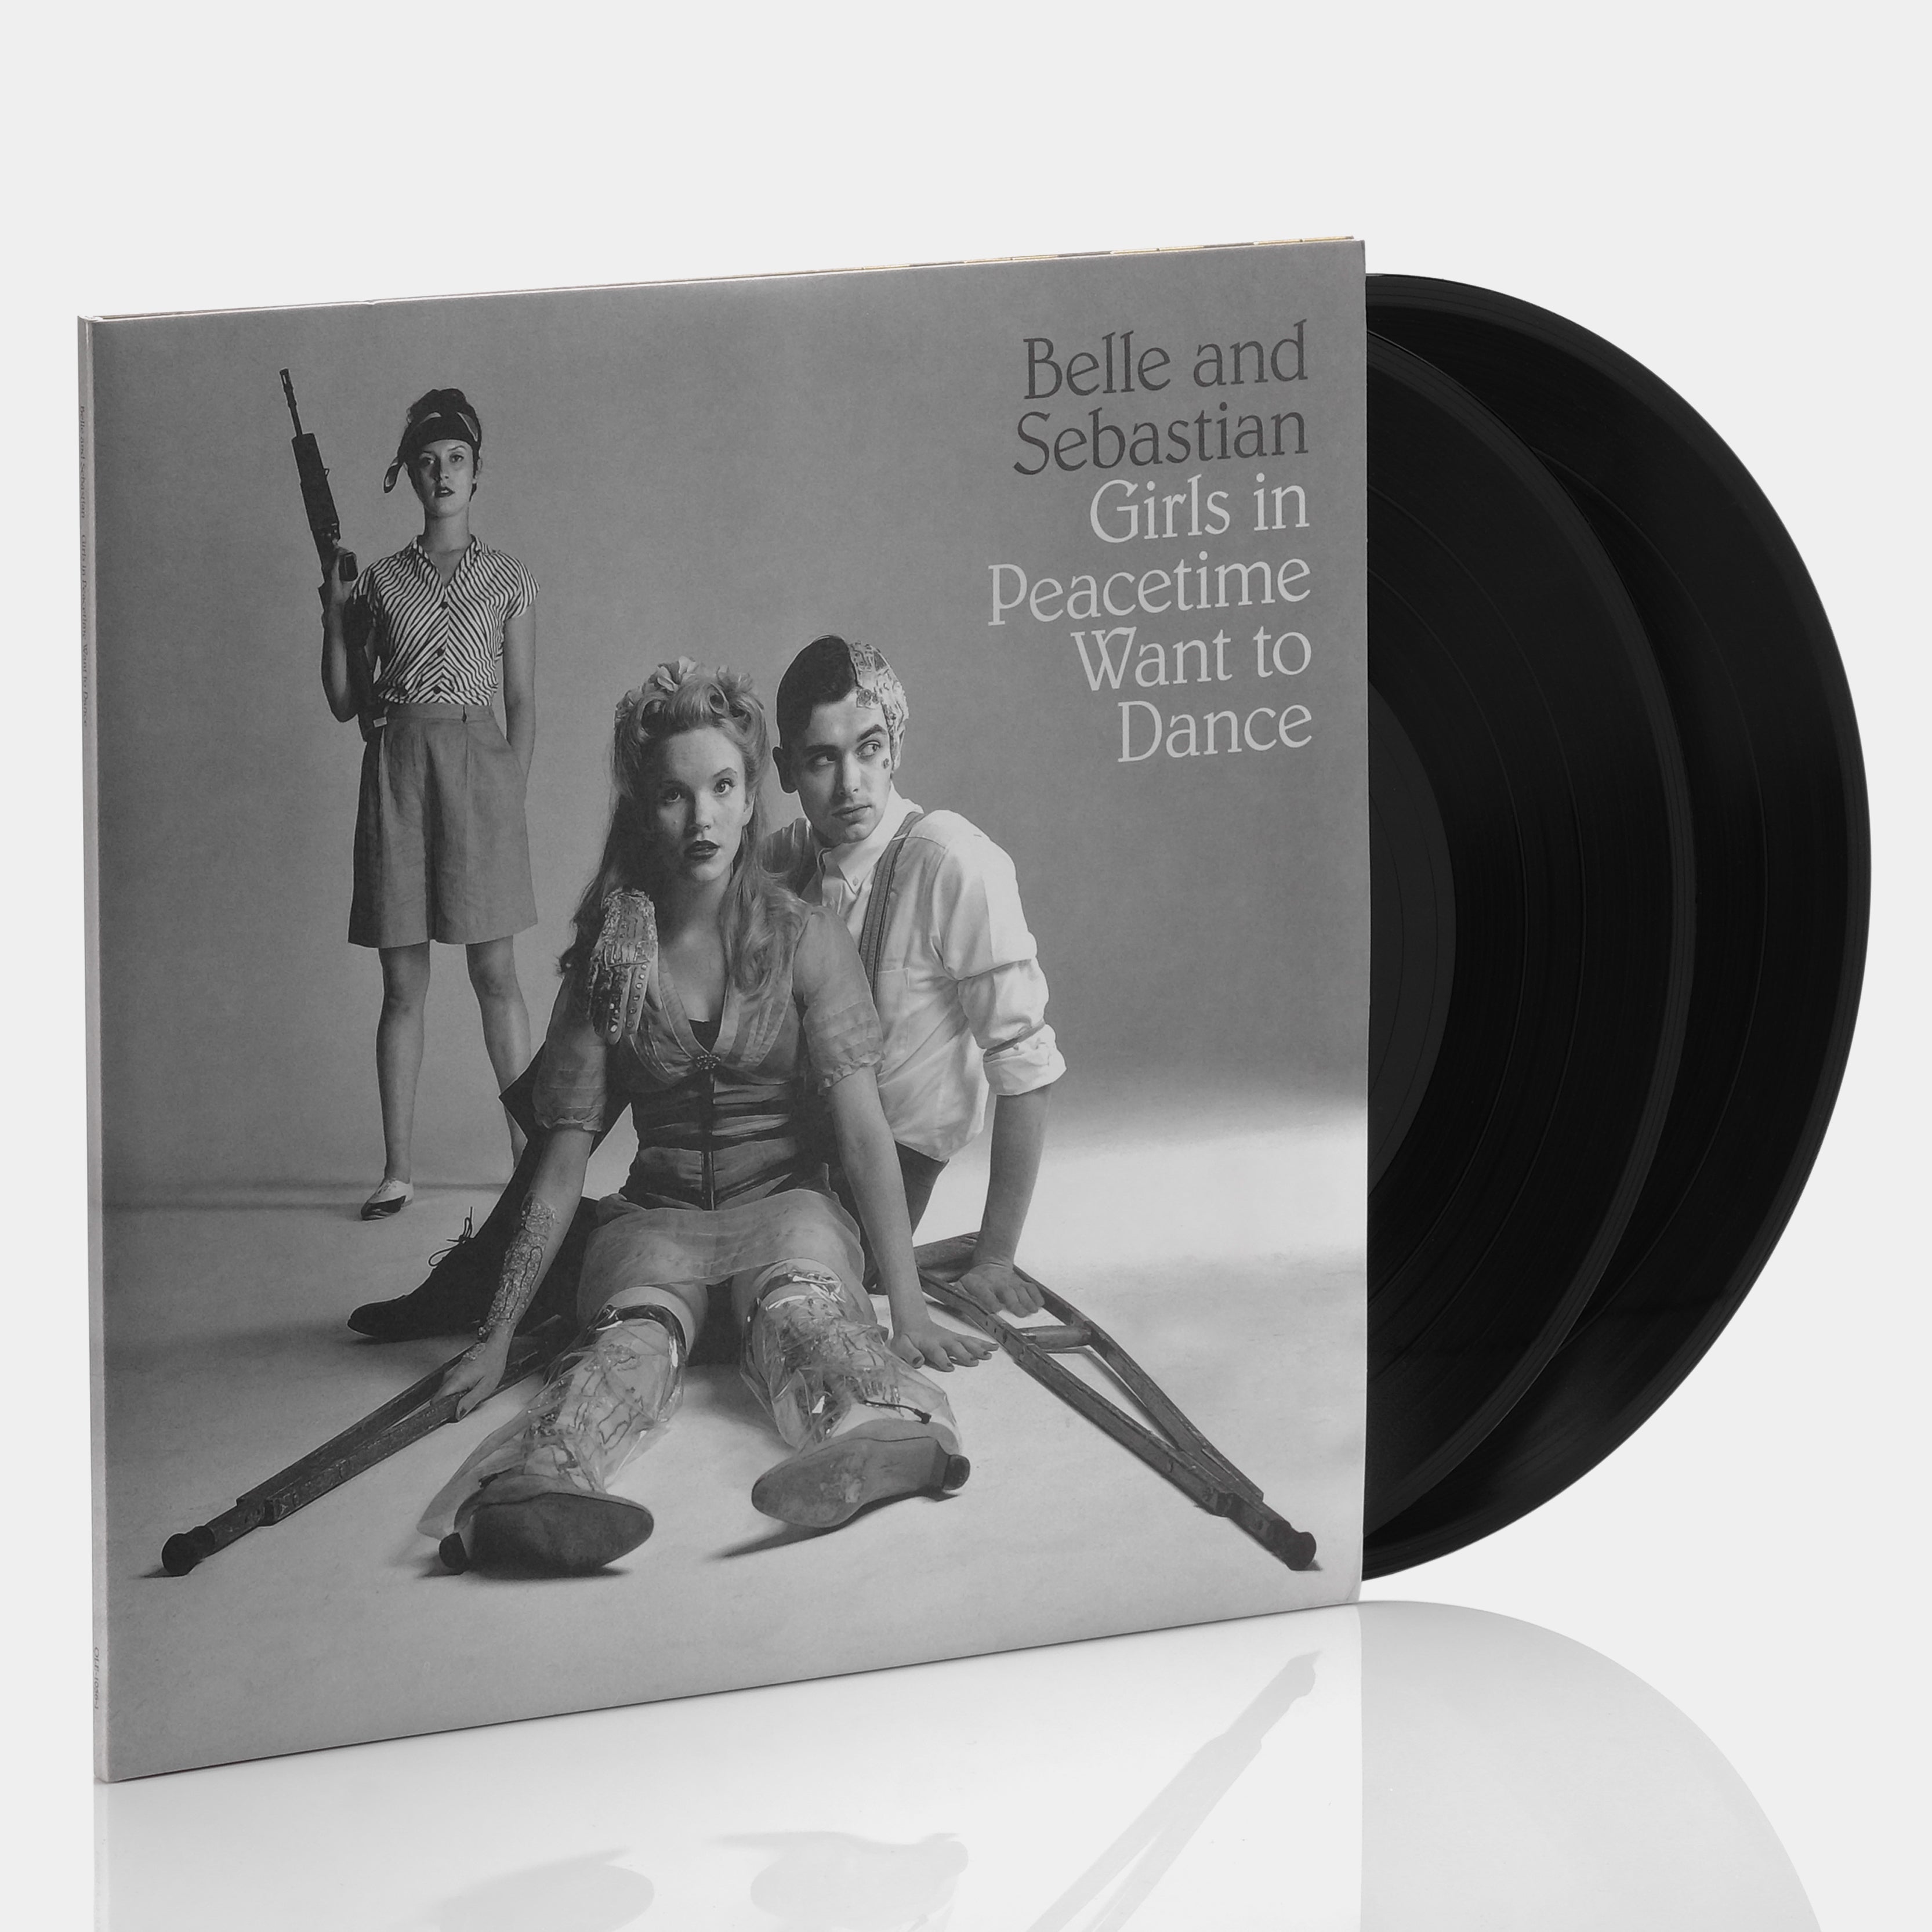 Belle And Sebastian - Girls In Peacetime Want To Dance 2xLP Vinyl Record